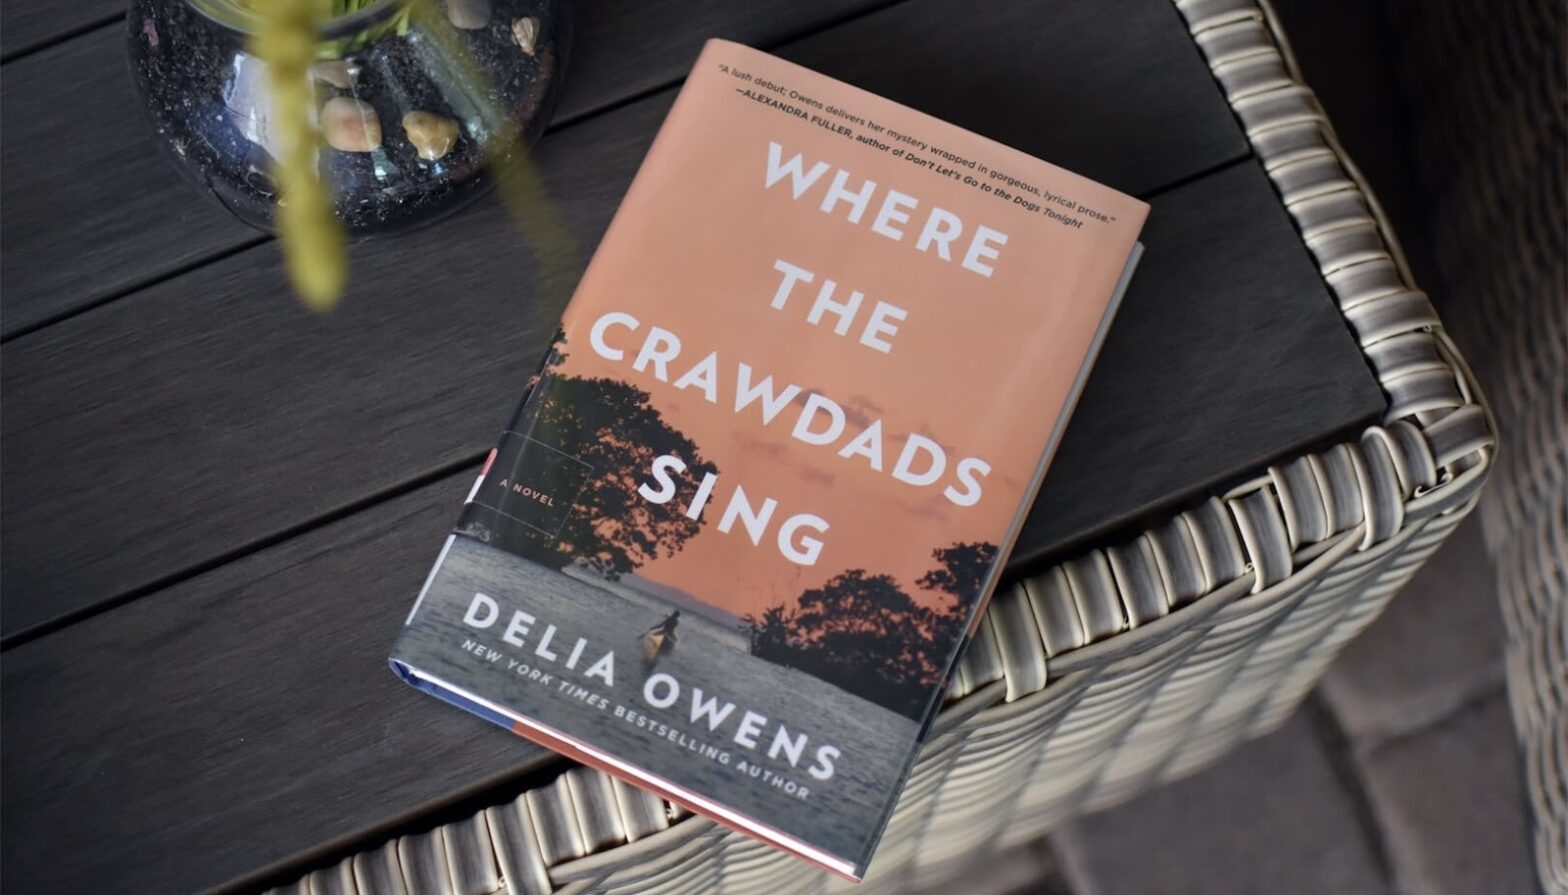 “Where the Crawdads Sing”: The Drama and Mystery